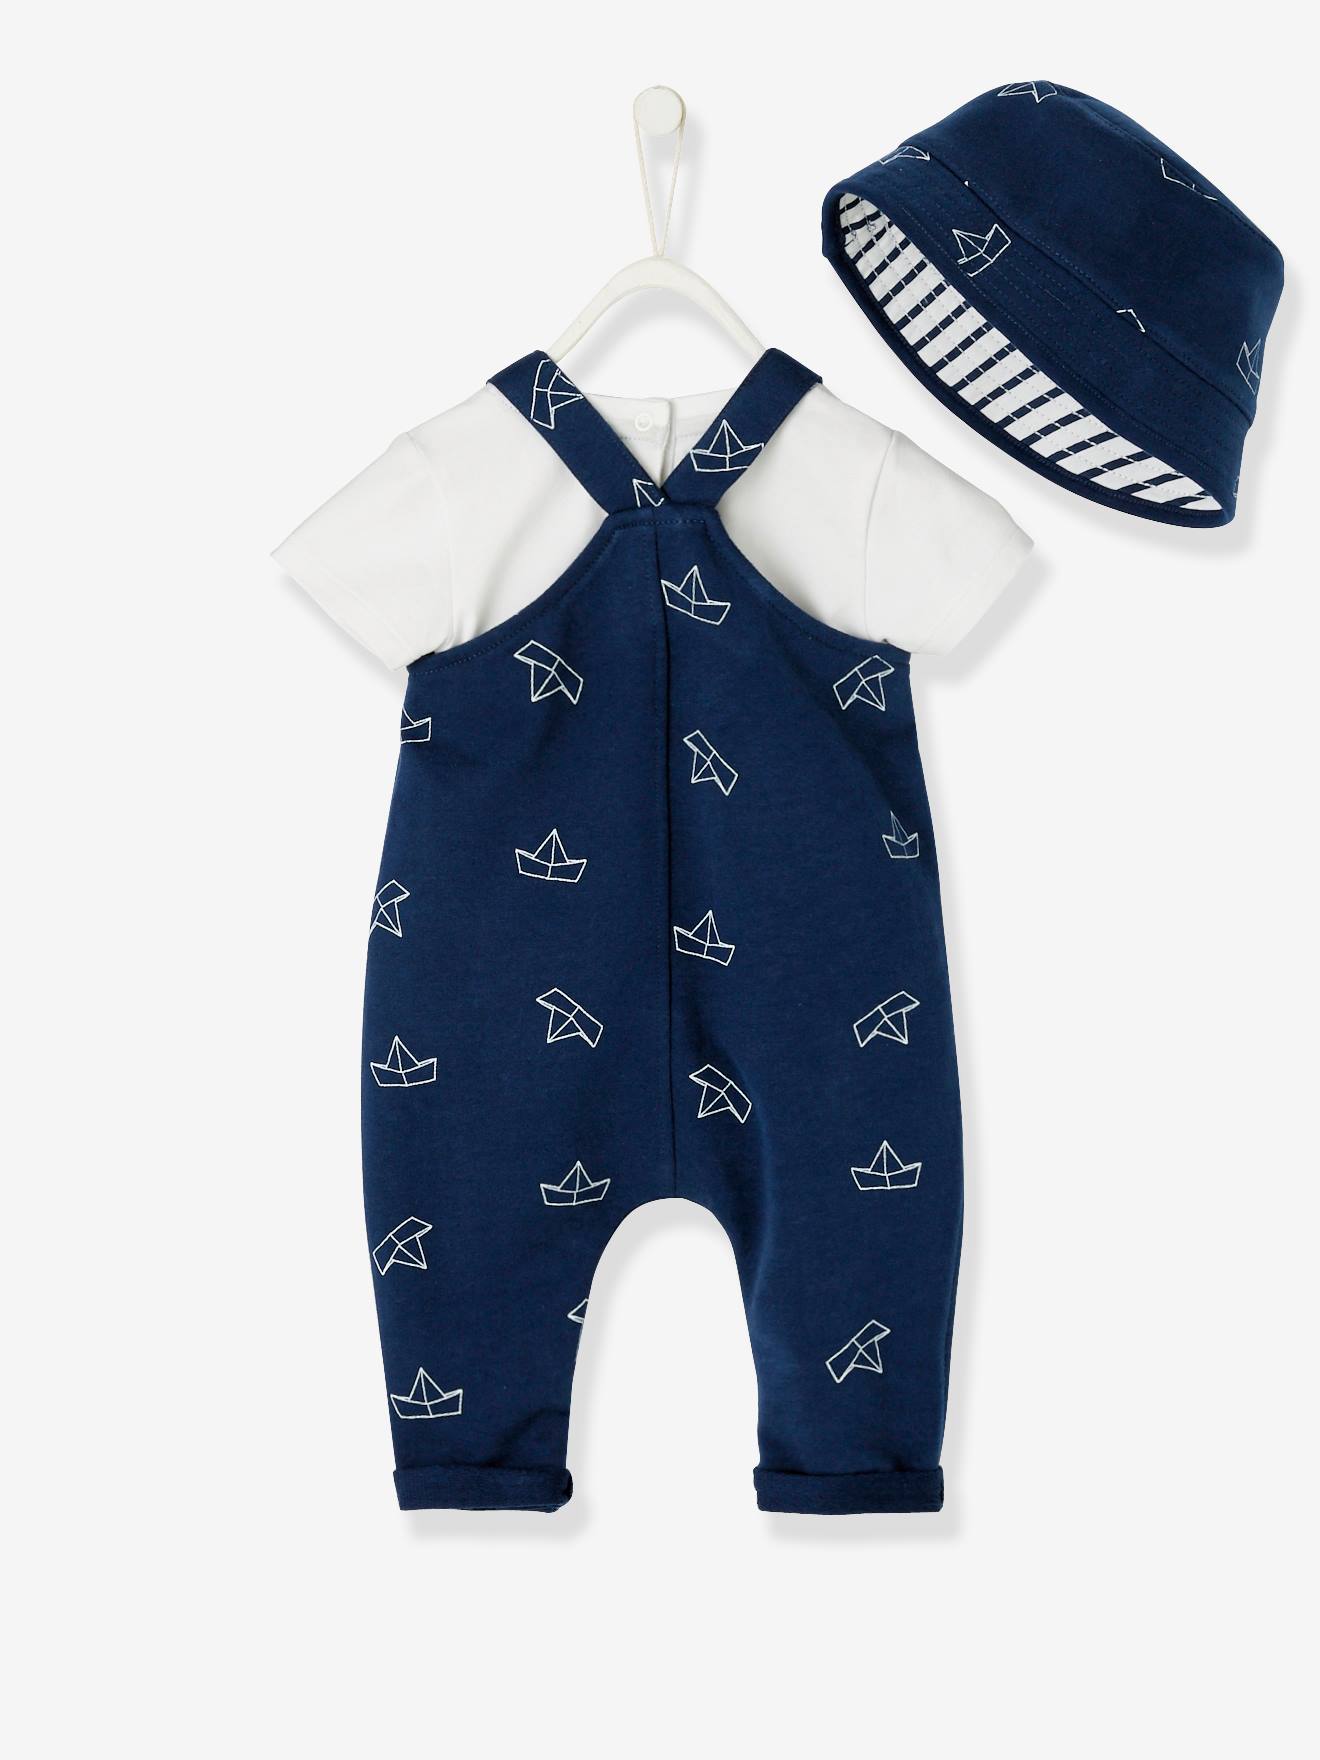 Baby Boys Blue Knitted Star Dungarees & White Long Sleeve Bodysuit Outfit Set 